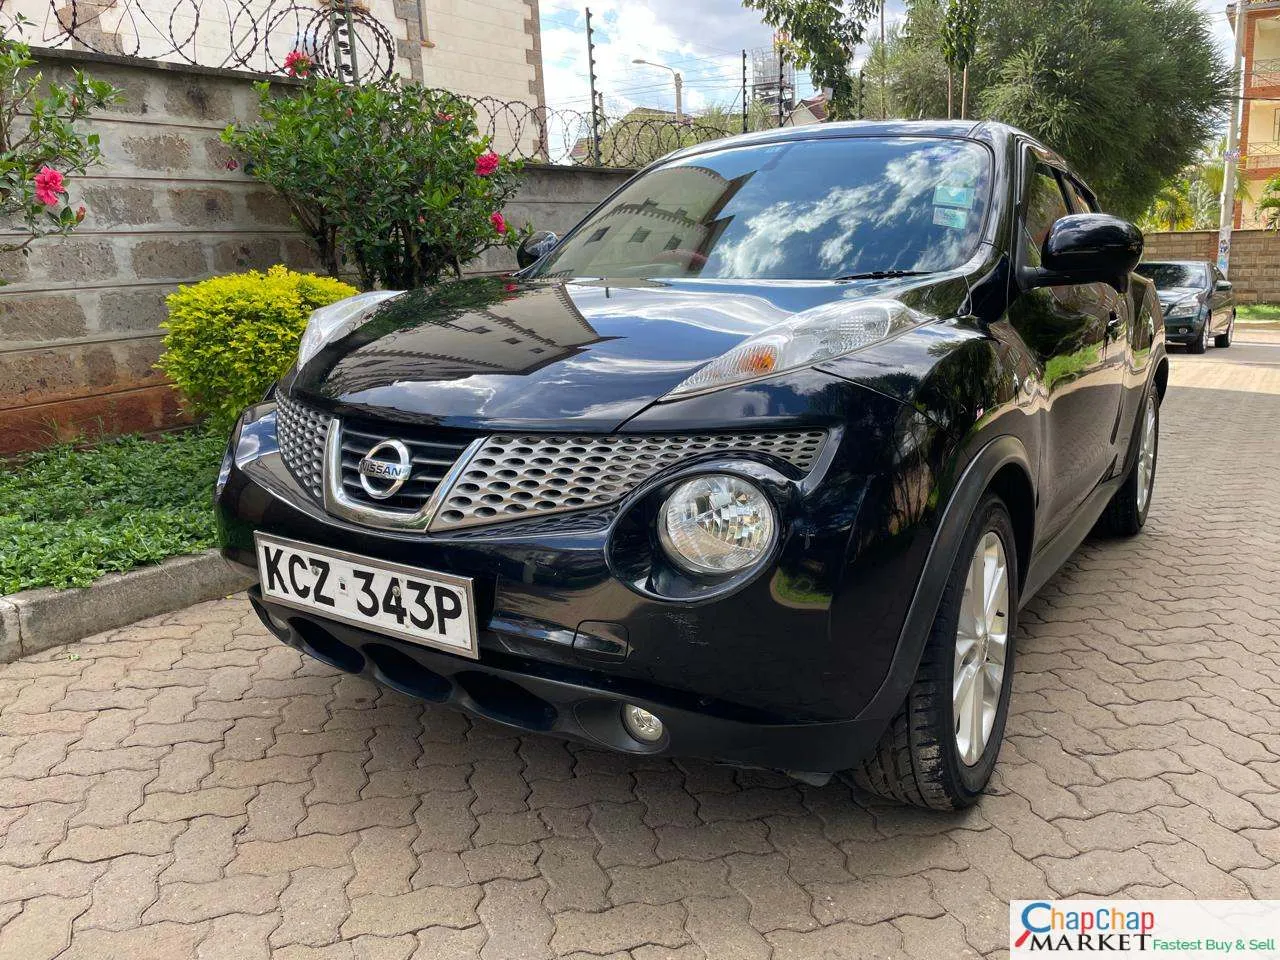 Nissan Juke QUICK SALE You Pay 30% Deposit Trade in Ok Wow! HIRE PURCHASE INSTALLMENTS (SOLD)